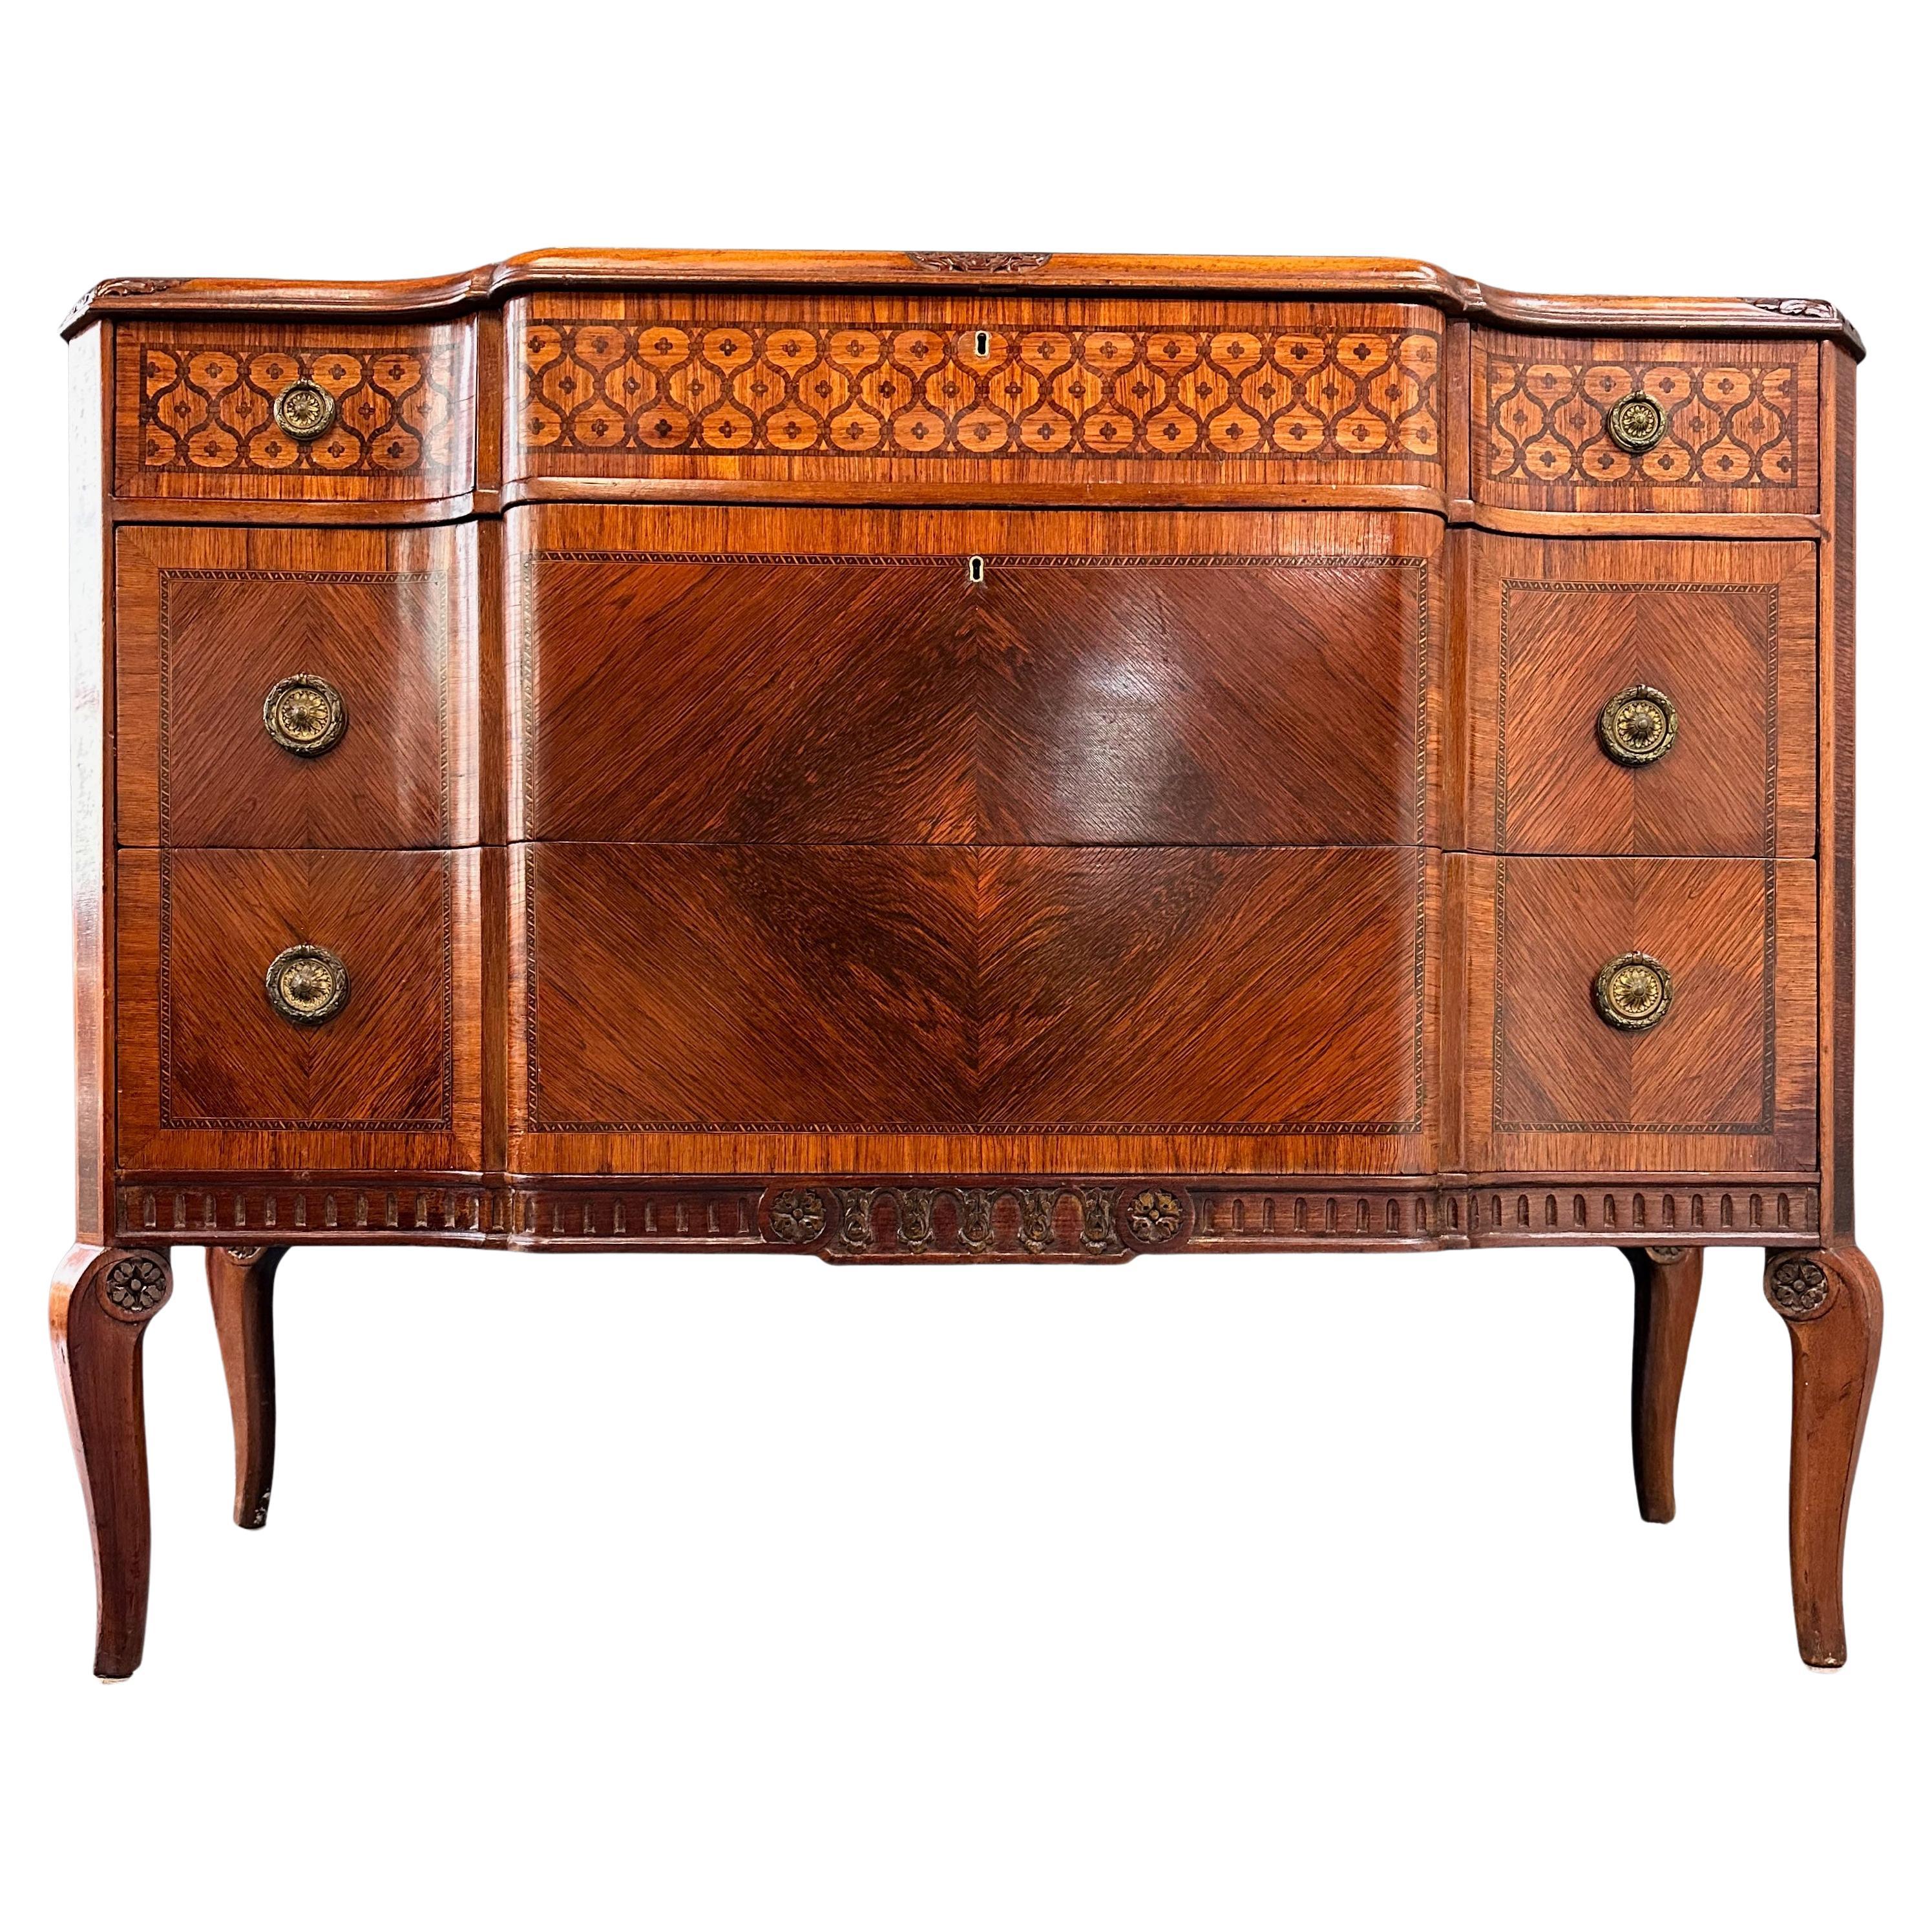 Italian Louis XVI Style Intricate Marquetry Commode Imported by Slack & Rassnick For Sale